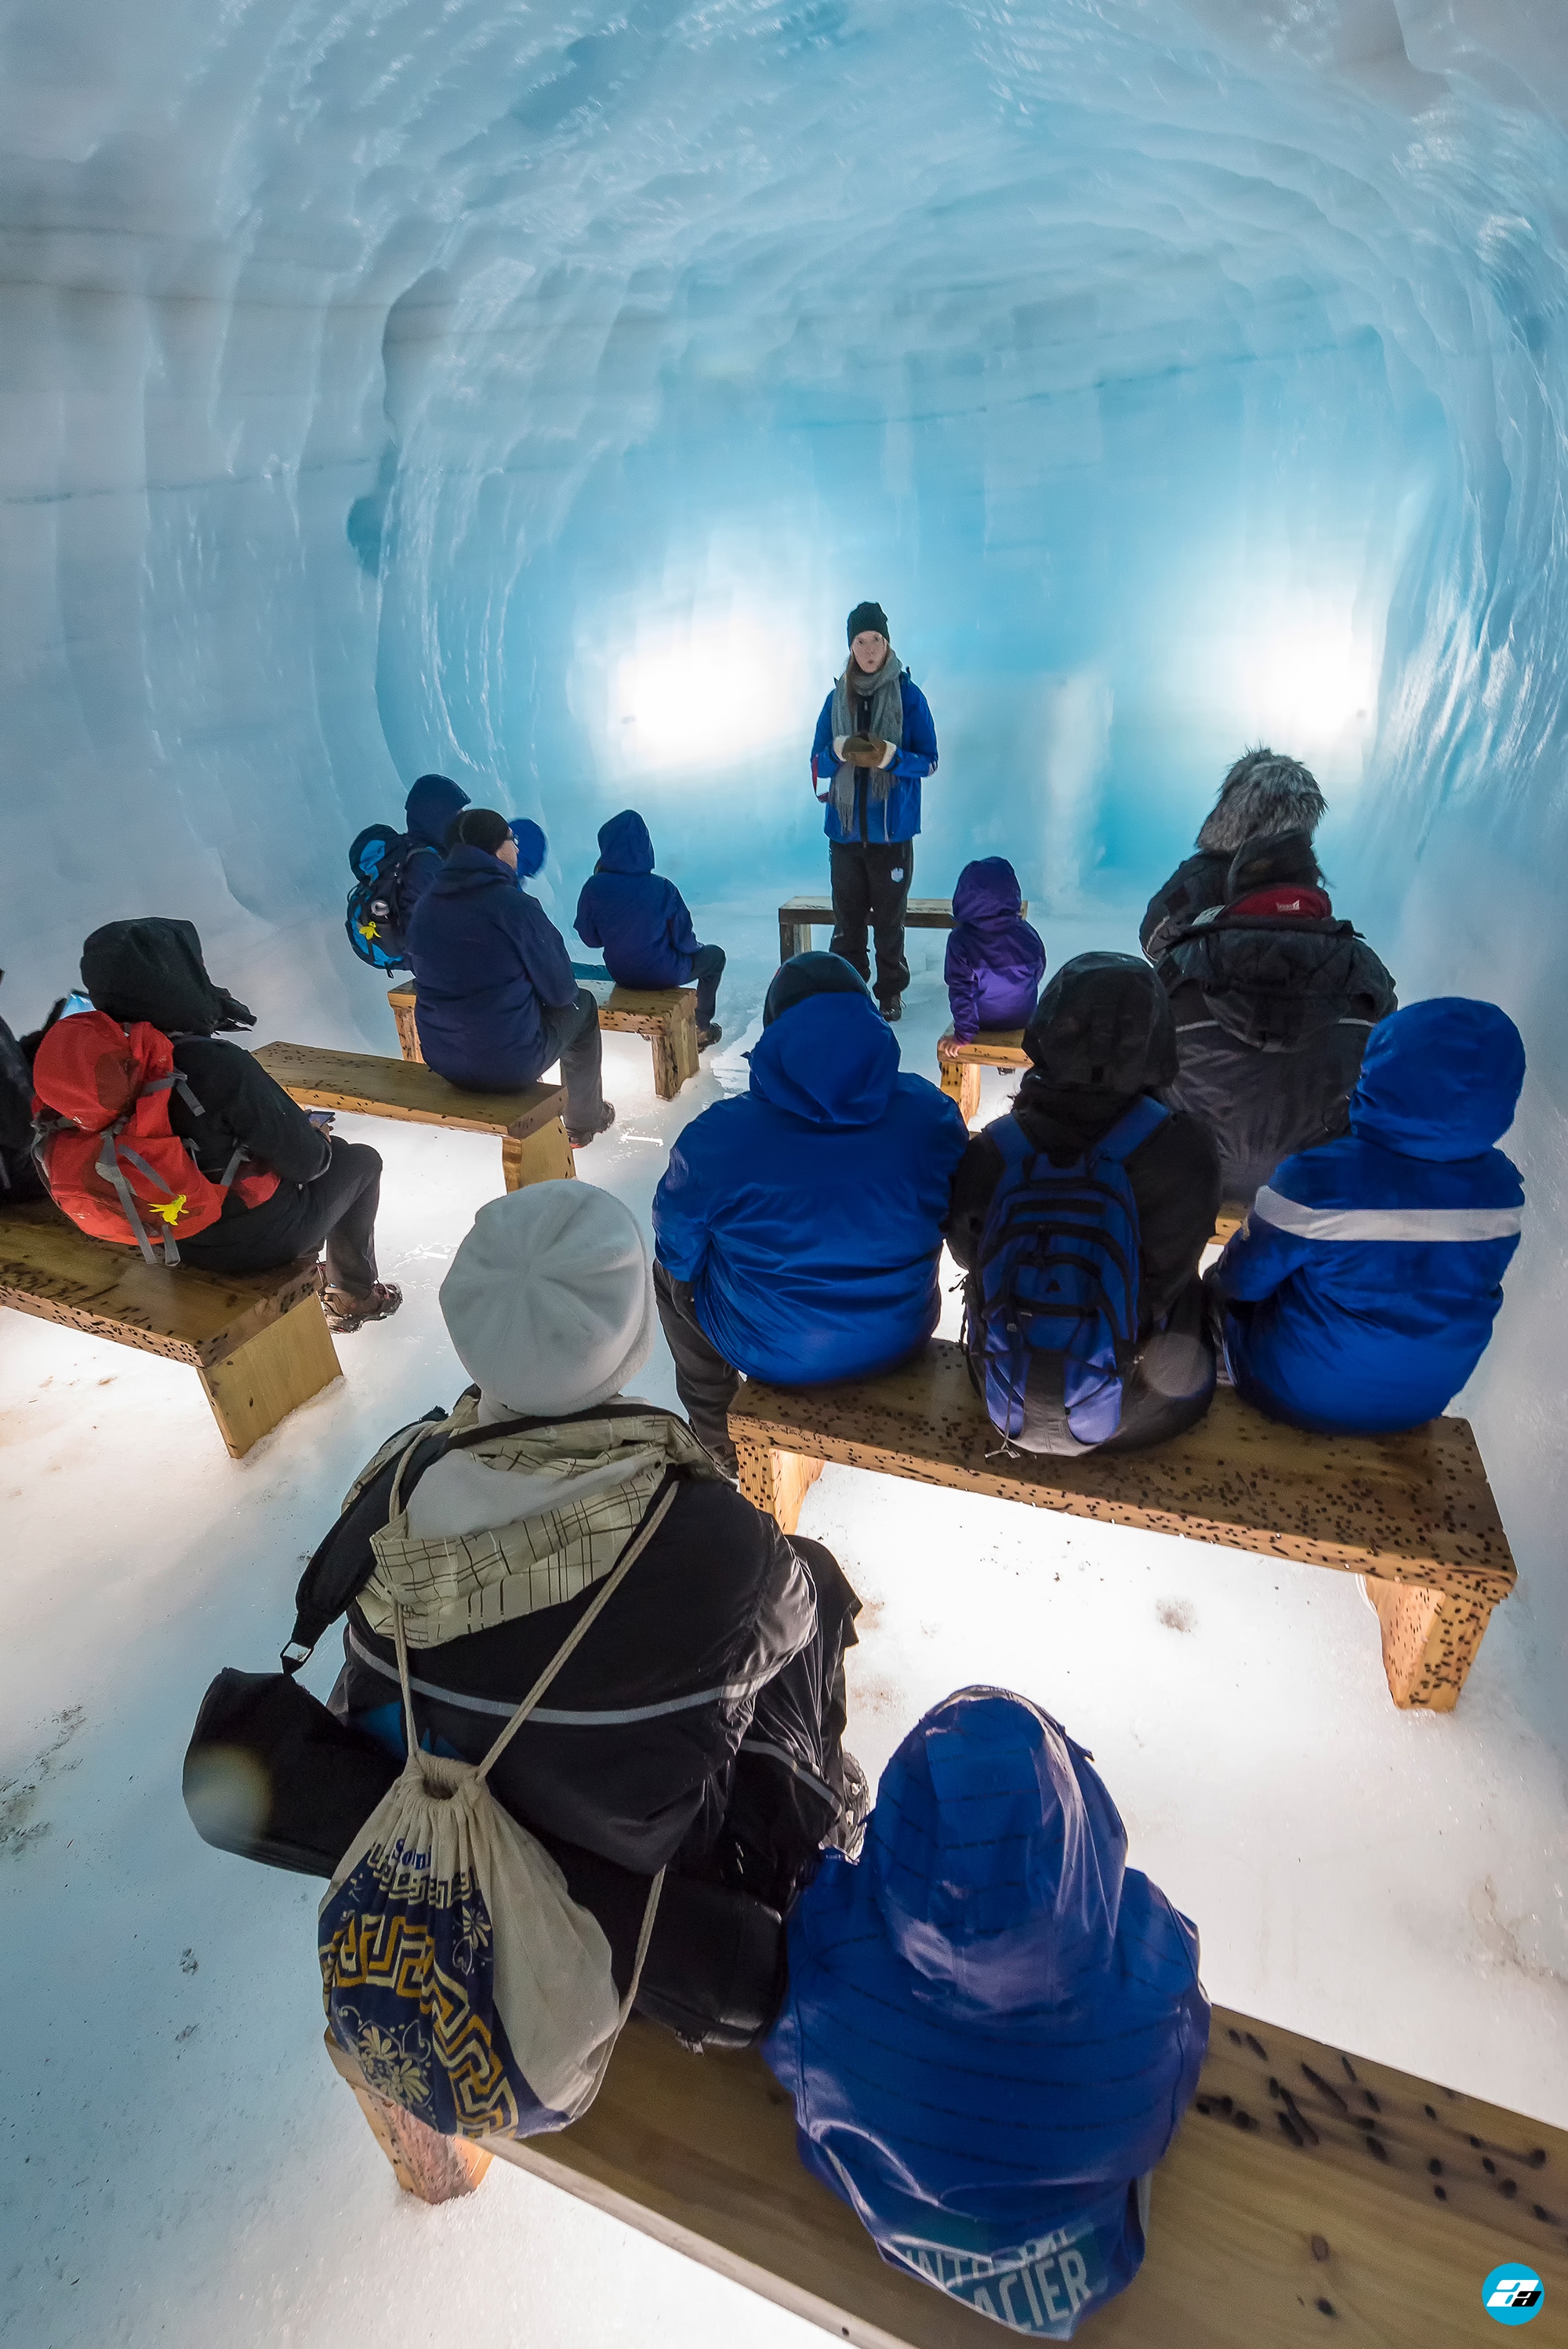 Iceland Travel, Ring Road, Langjokull, Iceland’s second largest glacier. Into the glacier trip / adventure. Inside the glacier tunnel. Briefing. Group Talk.